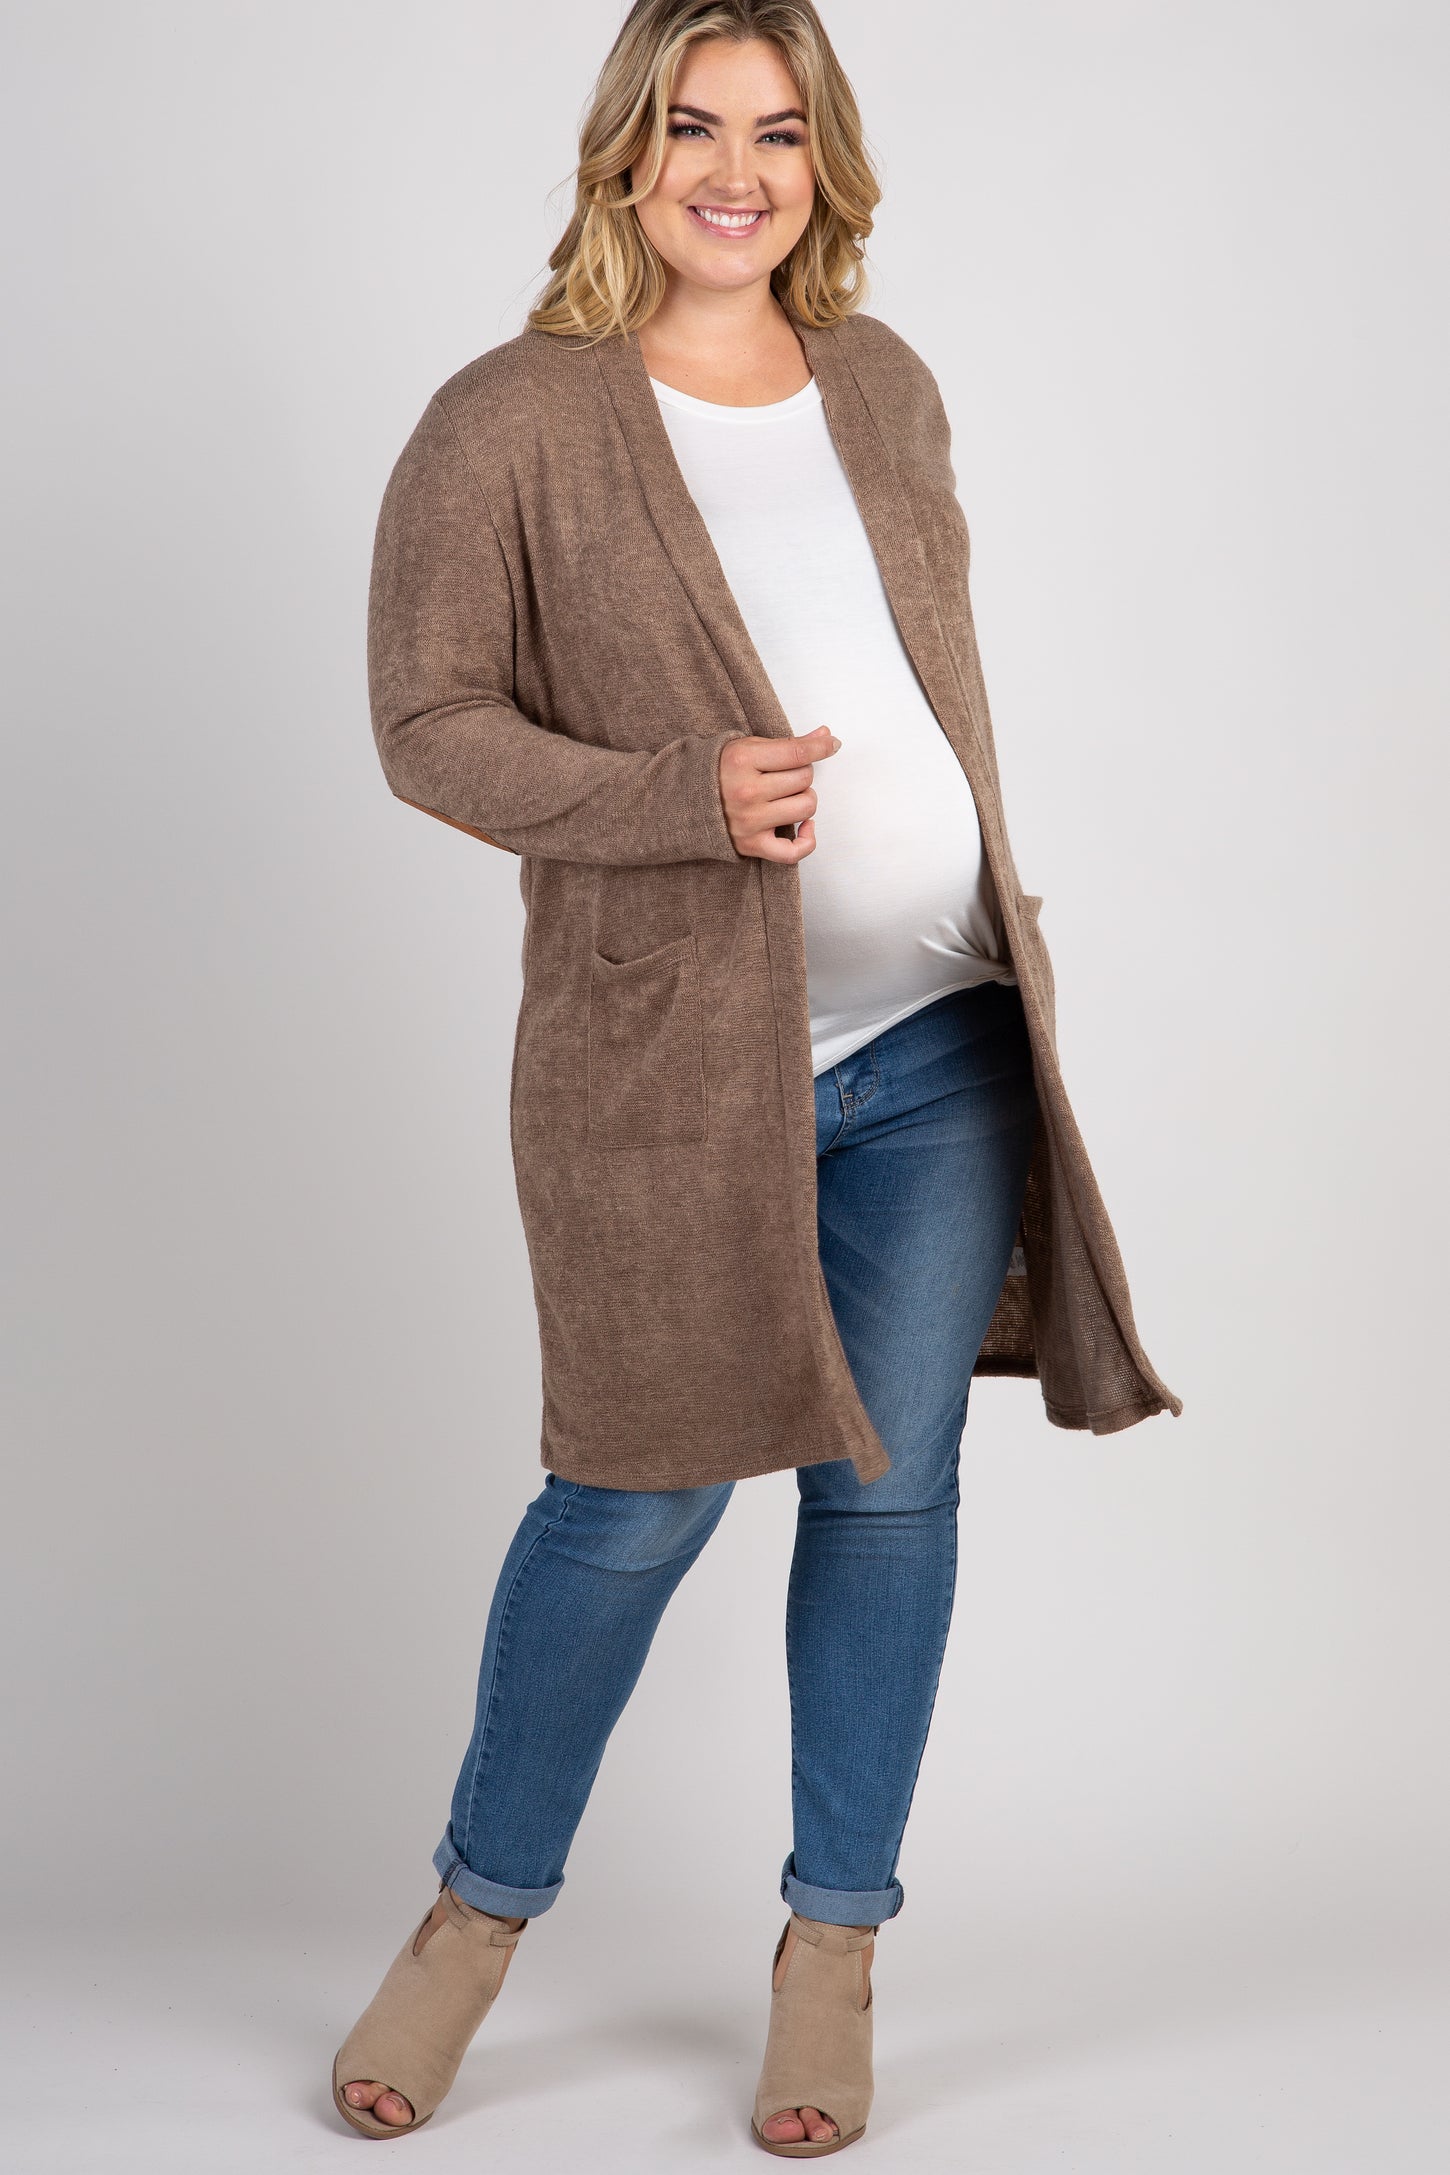 PinkBlush Taupe Knit Elbow Patch Maternity Plus Cardigan